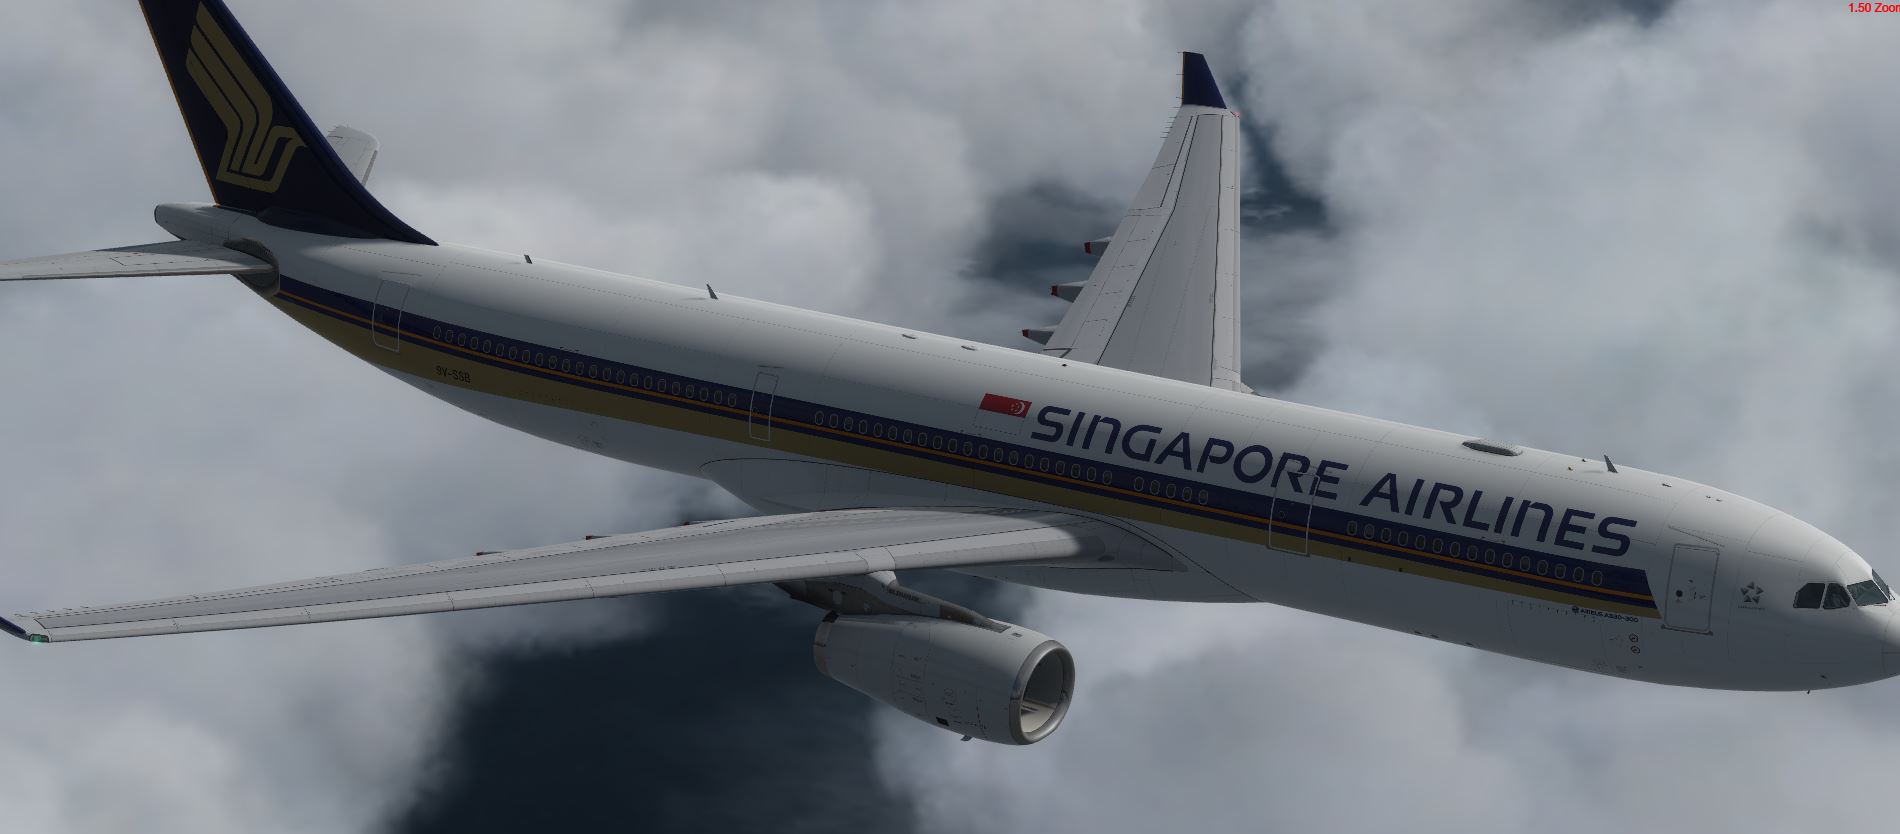 AS A330 Singapore Airlines-2738 